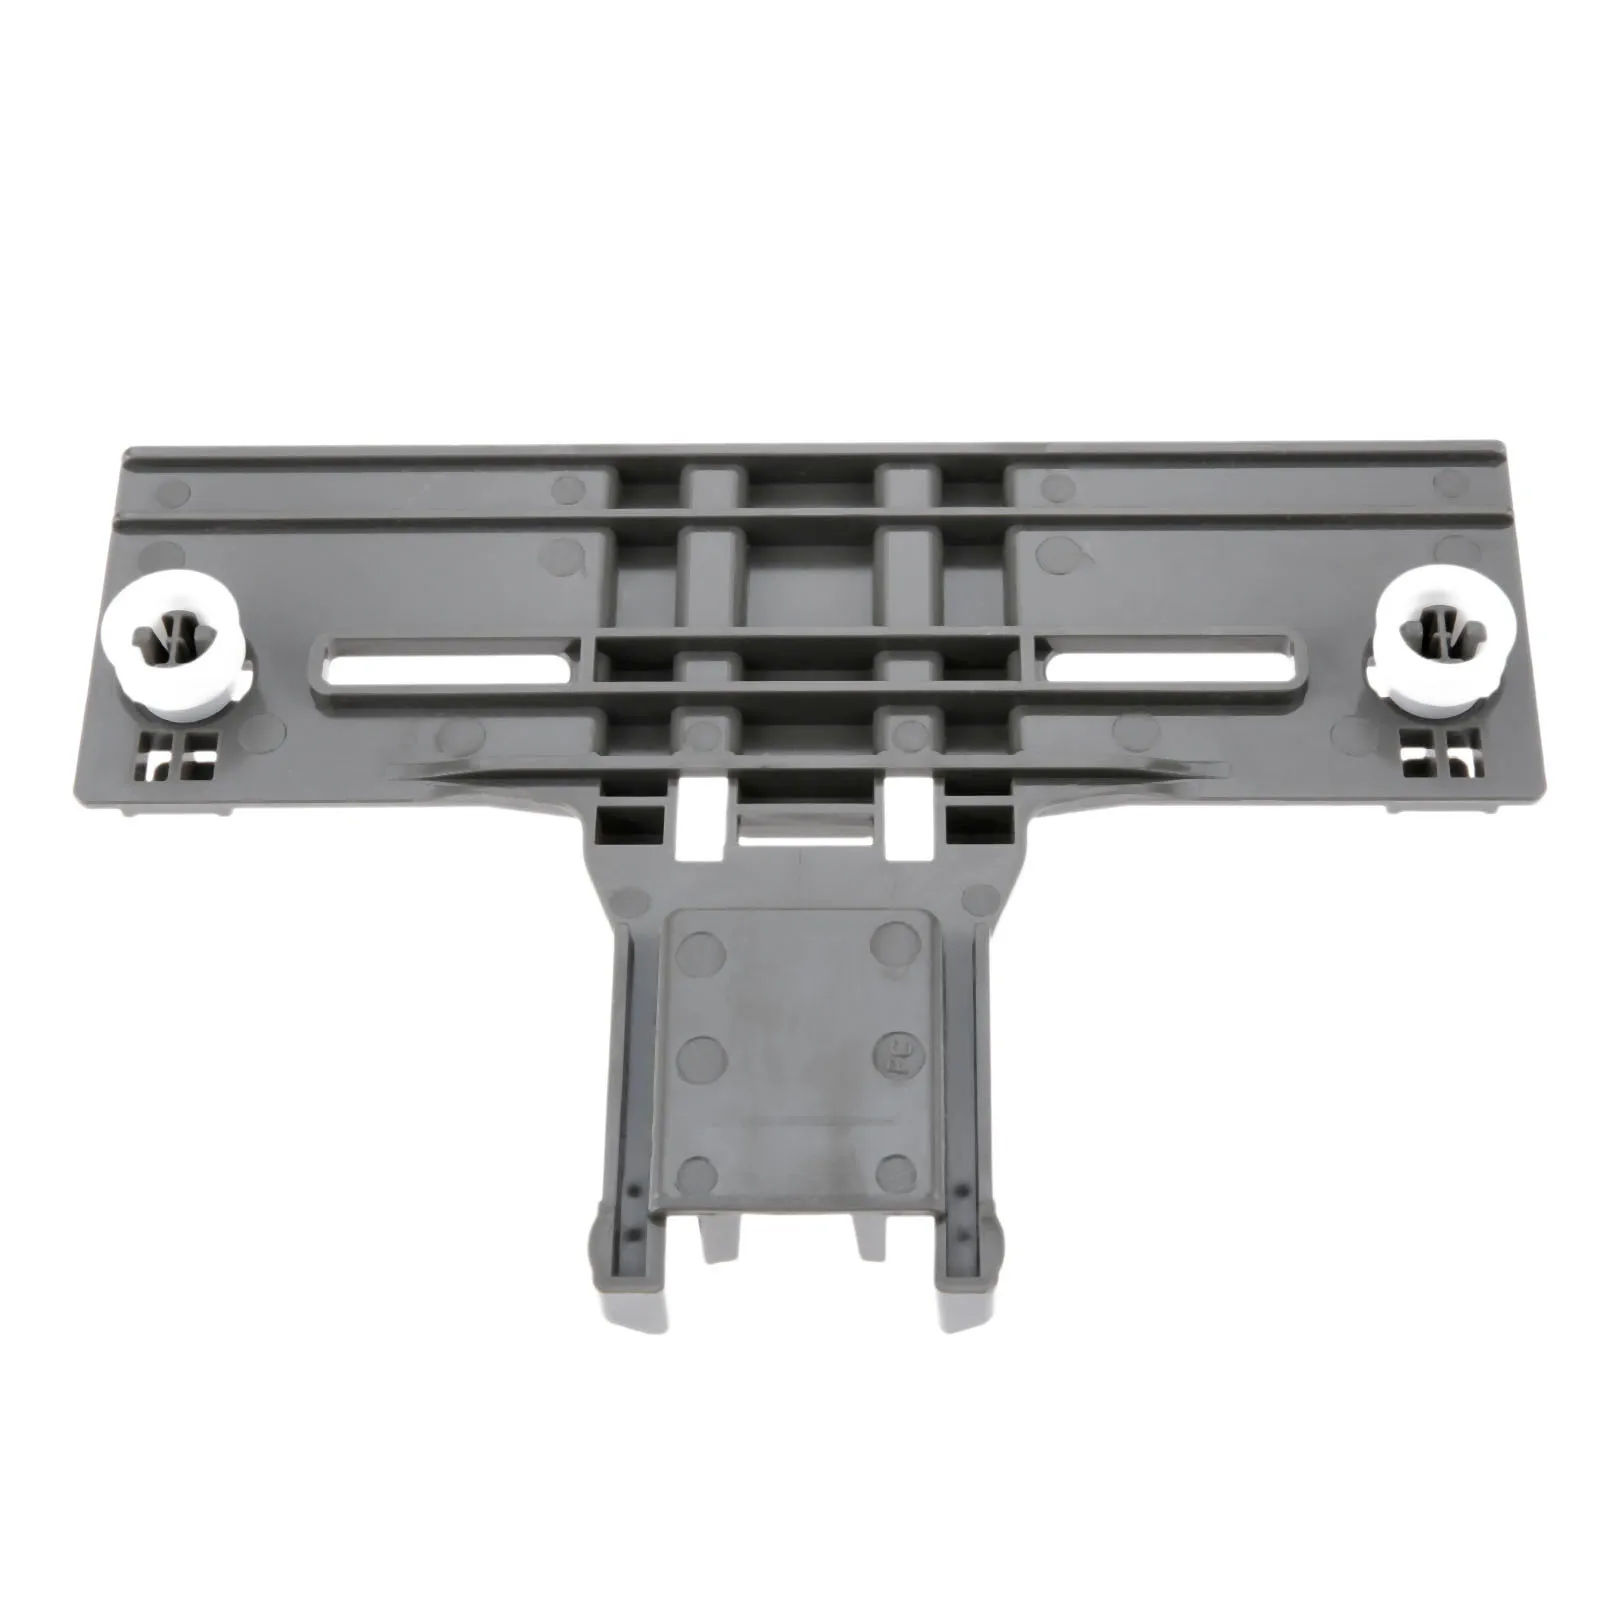 

ABS Dishwasher Upper Rack Adjuster With Wheel Fit For Whirlpool KitchenAid Kenmore Jenn-Air W10350376